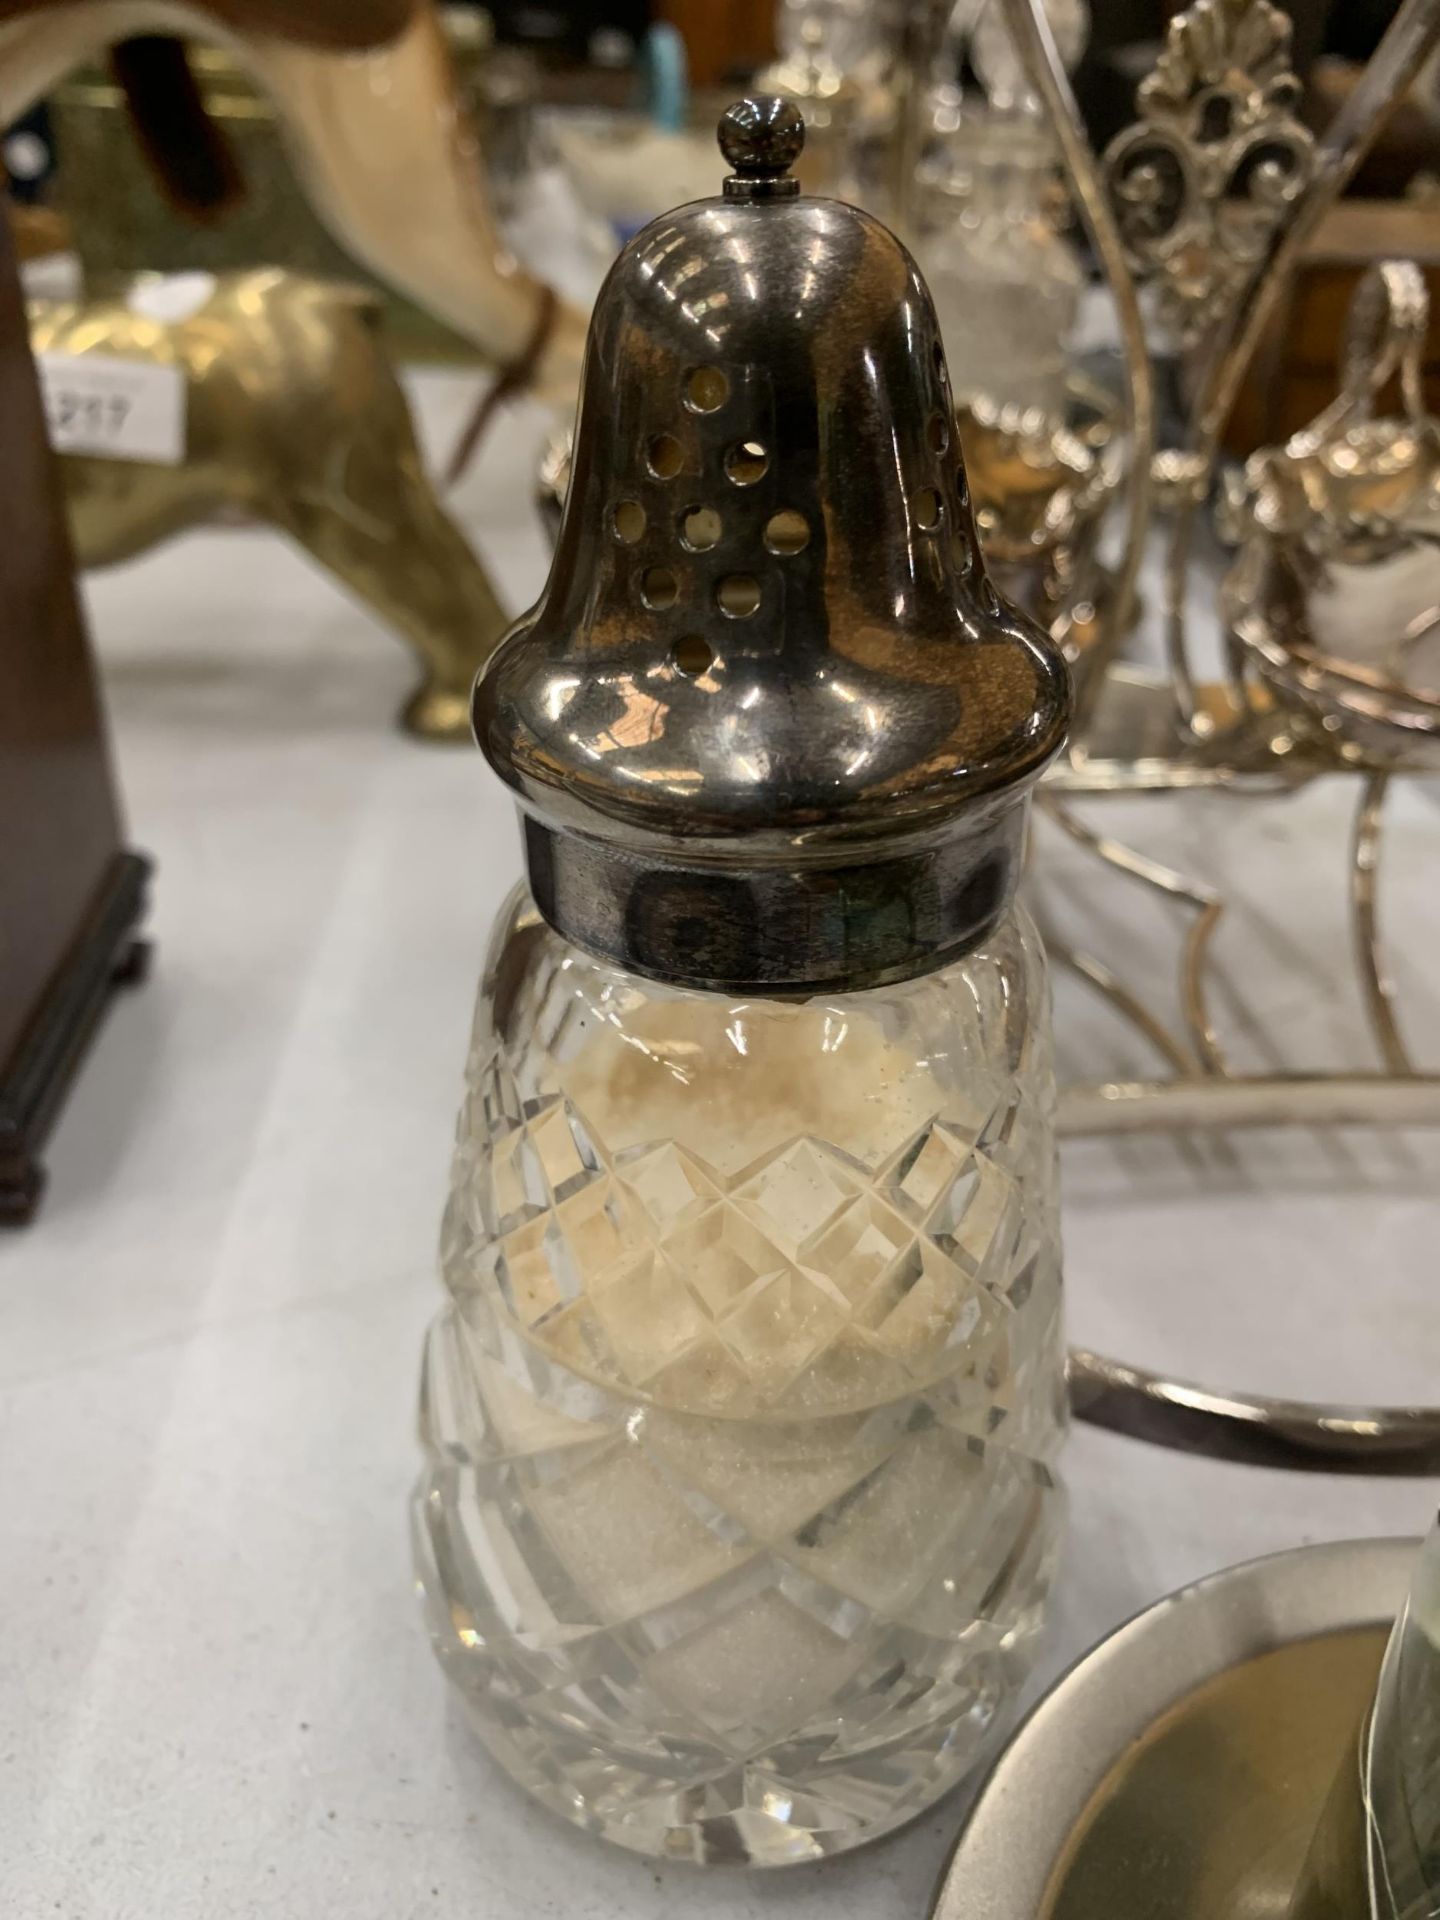 A QUANTITY OF SILVER PLATE AND GLASS CONDIMENTS TO INCLUDE A SUGAR SHAKER, PRESERVE POT, ETC - Image 3 of 5